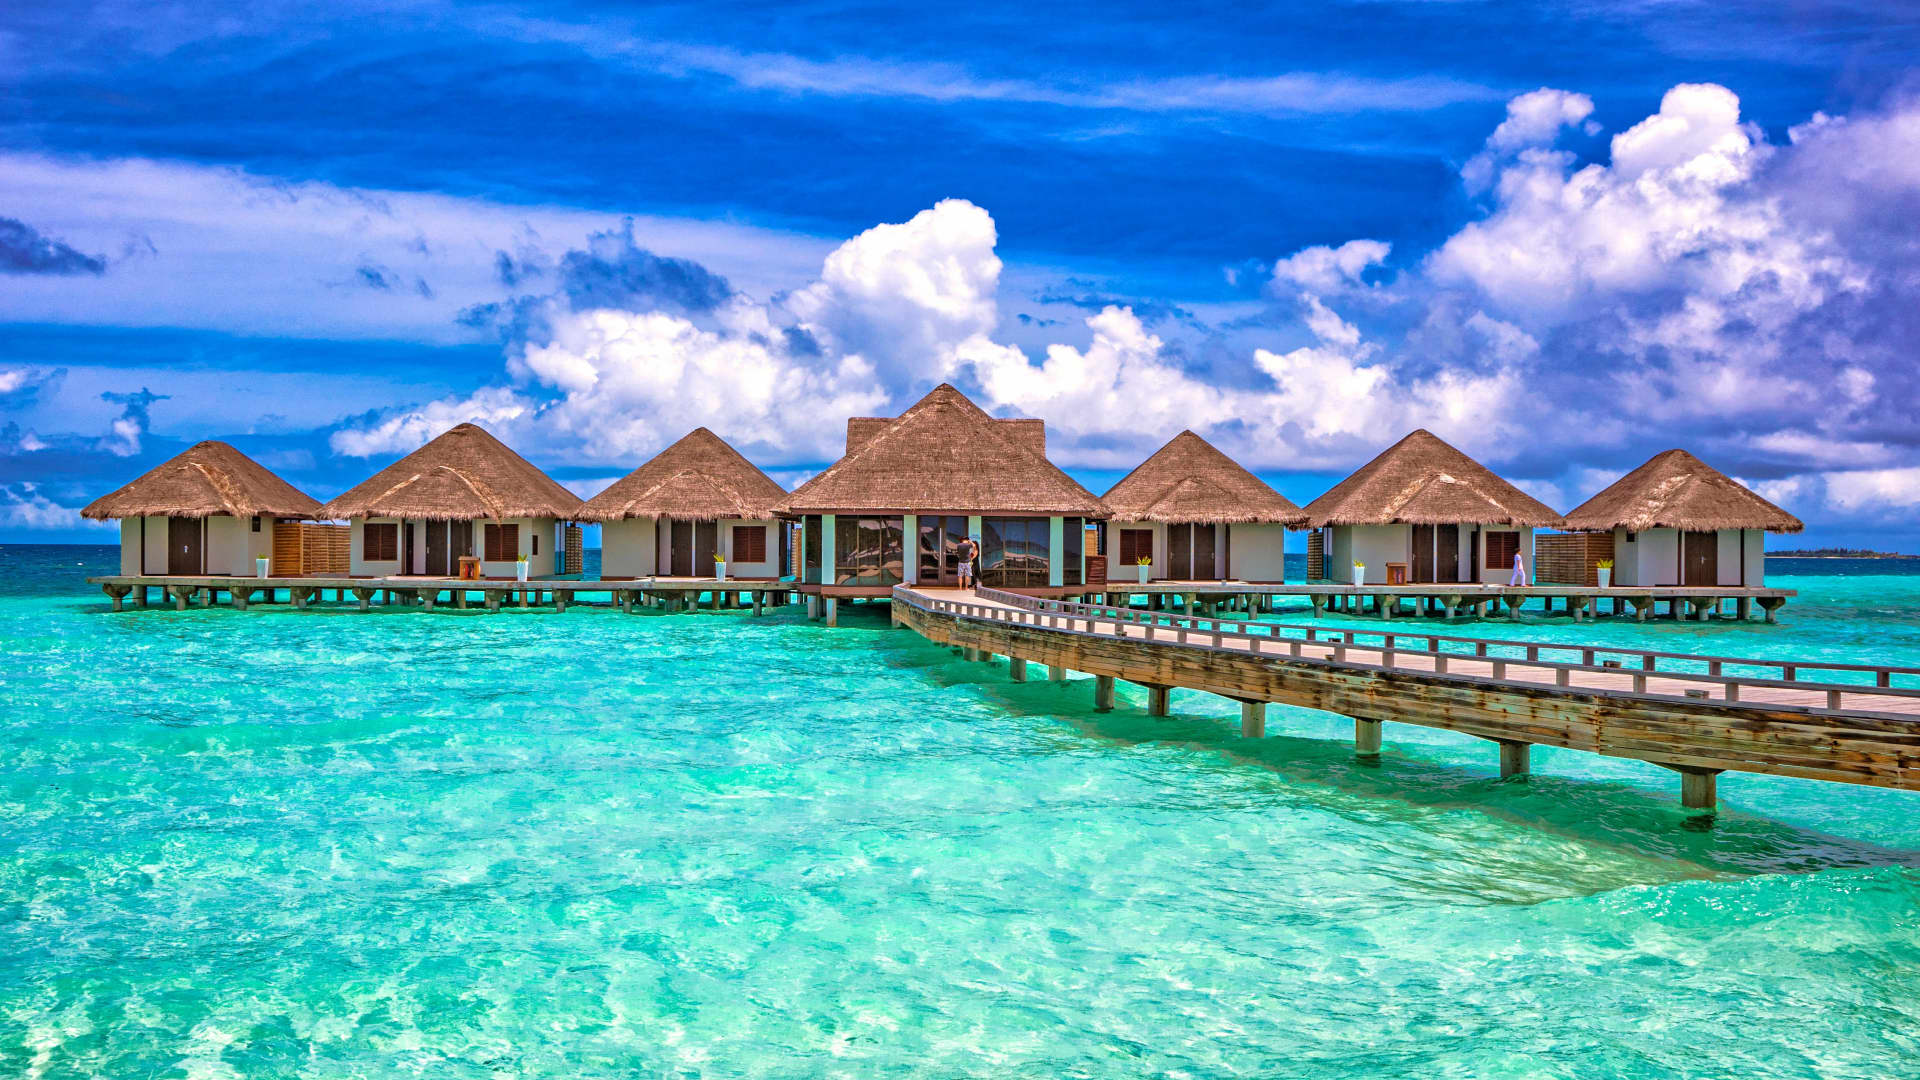 Is it safe to visit the Maldives? Here's what hotels are doing